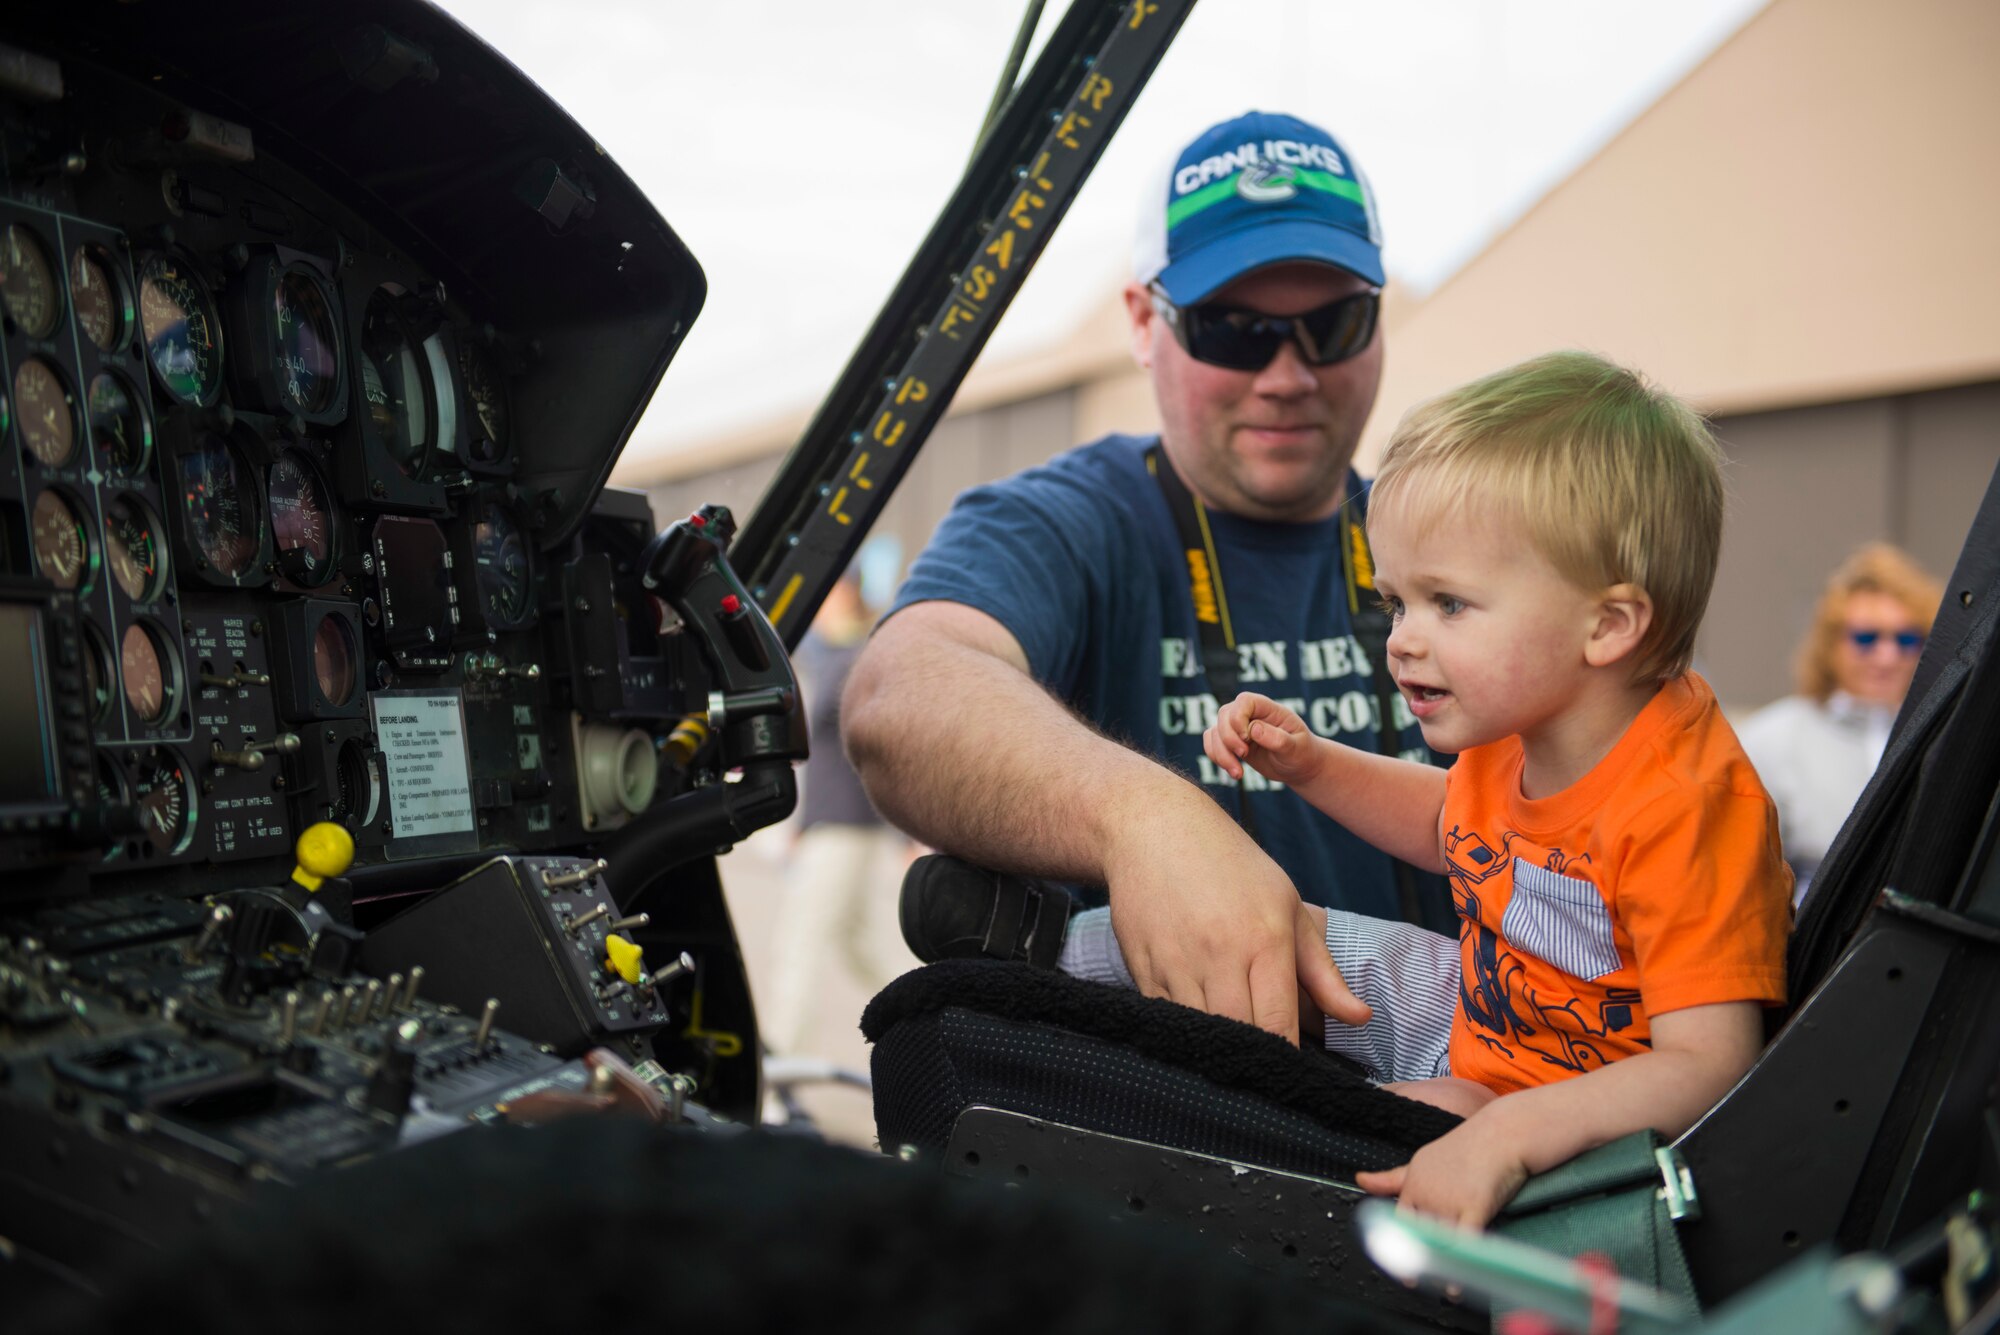 Porter, a Skyfest 2019 visitor,  sits inside the flightdeck of a UH-1N Huey during the Skyfest 2019 Open House and Airshow at Fairchild Air Force Base, Washington, June 22, 2019. Skyfest 2019 Open House and Airshow offered a unique view of Team Fairchild’s role in enabling Rapid Global Mobility for the U.S. Air Force. The show featured more than 13 aerial acts and 16 static display aircraft, as well as other attractions and displays. (U.S. Air Force photo by Airman 1st Class Lawrence Sena)